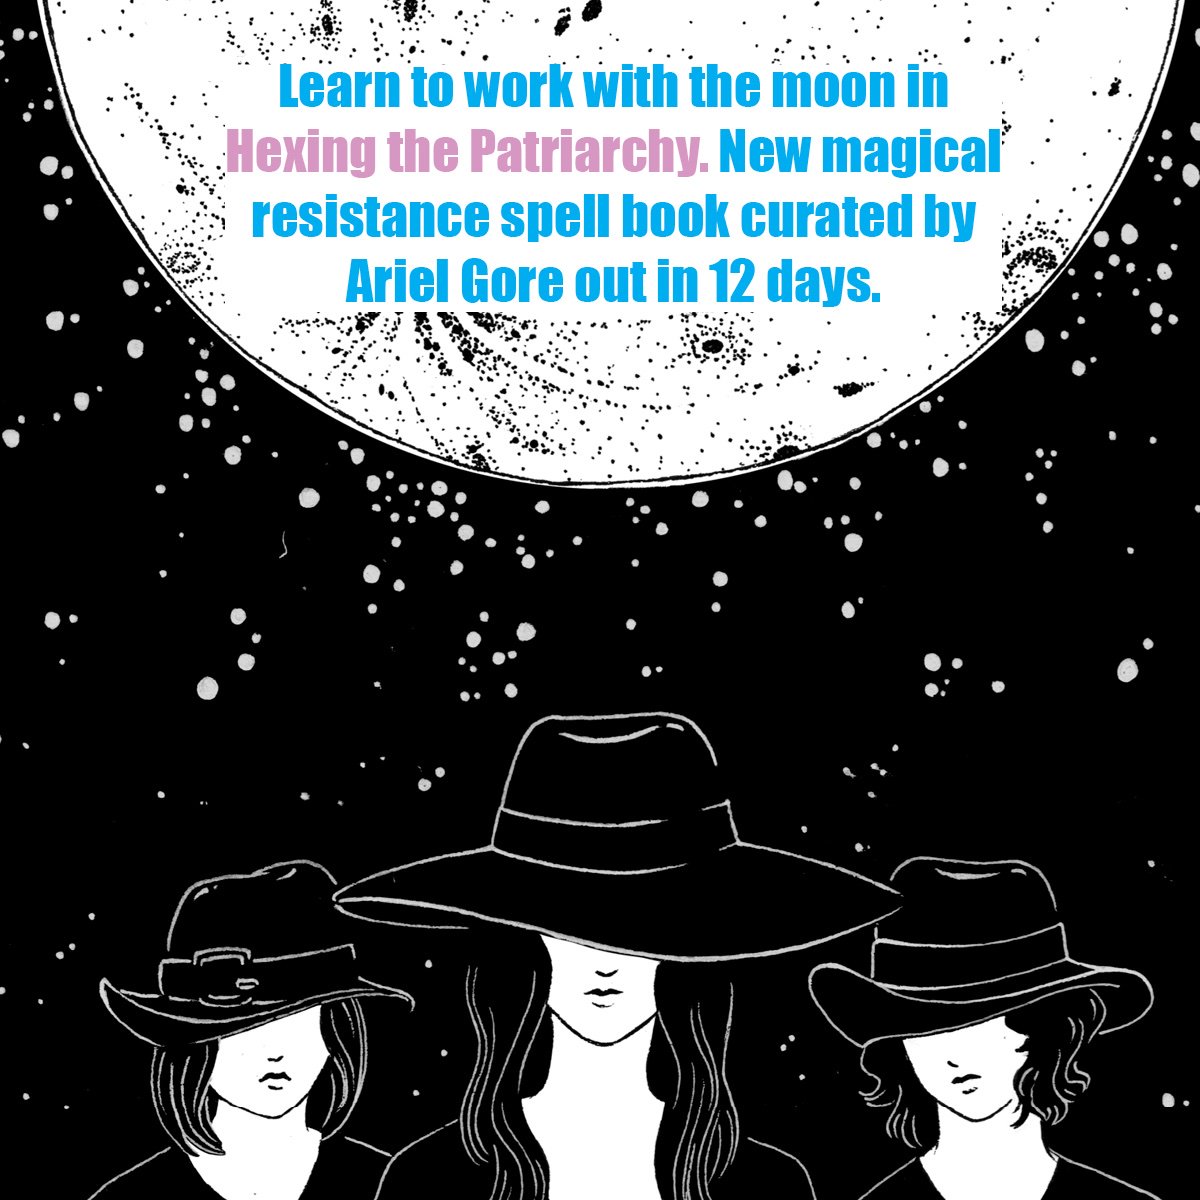 Witches from all over show you how they're #hexingthepatriarchy. #ImpeachmentIsComing #magicalresistance #moonspell